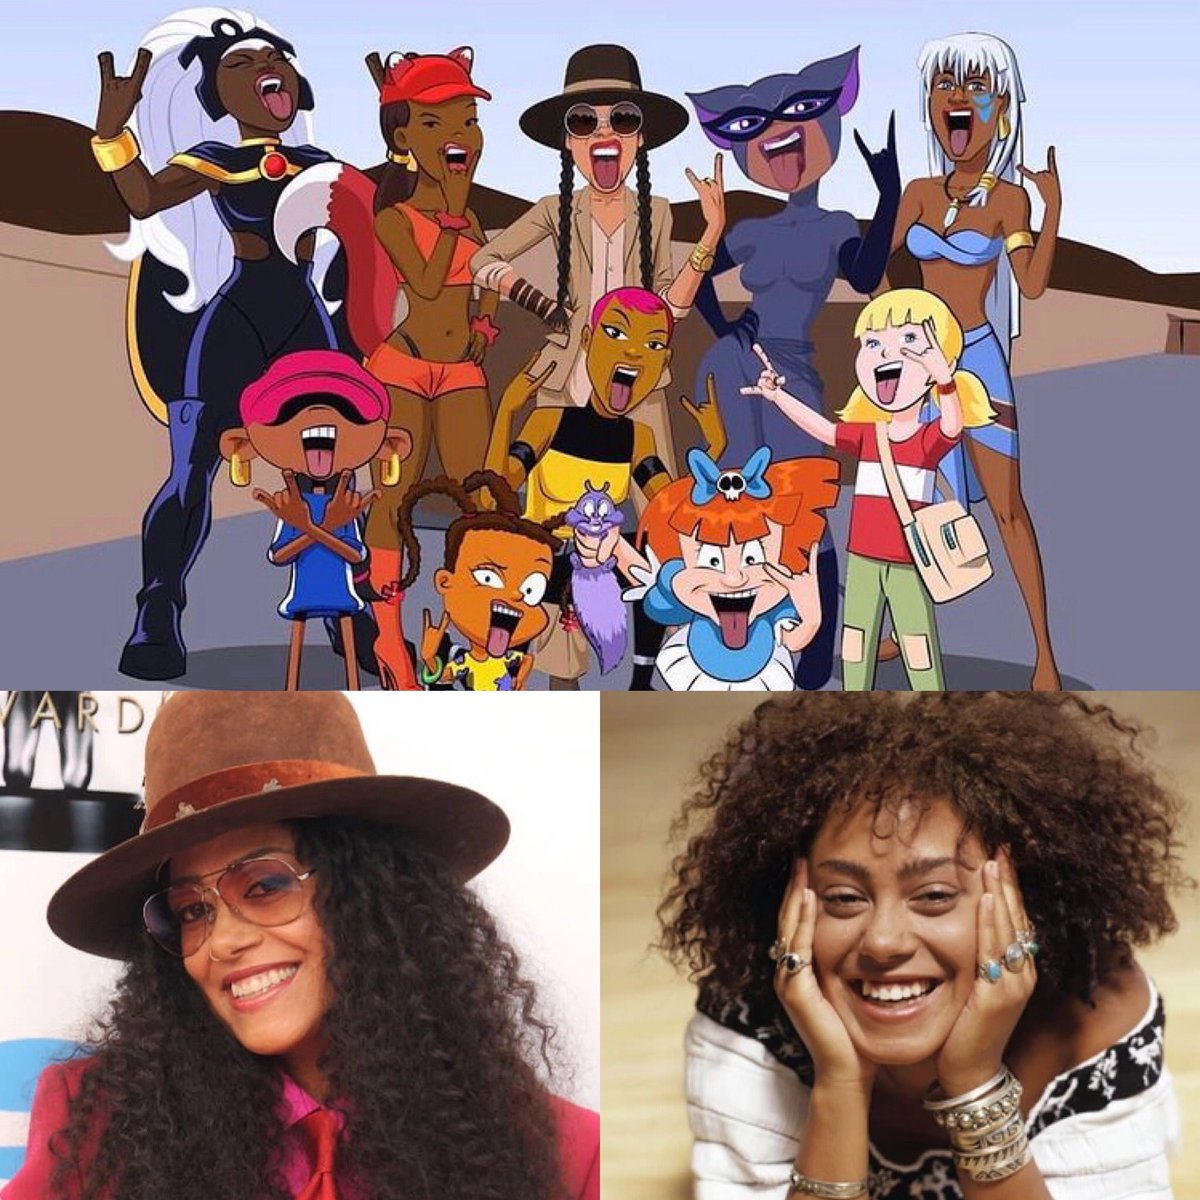 Black History Salute to the voice!!! @IAmCreeSummer  voicing all our favorite cartoons. Thank you for being a voice/face in the room of some of the most iconic shows #creesummer #rugrats #susiecarmichael #ParamountPlus #rugratsreeboot #blackvoice  #blackcartoons #drawntogether